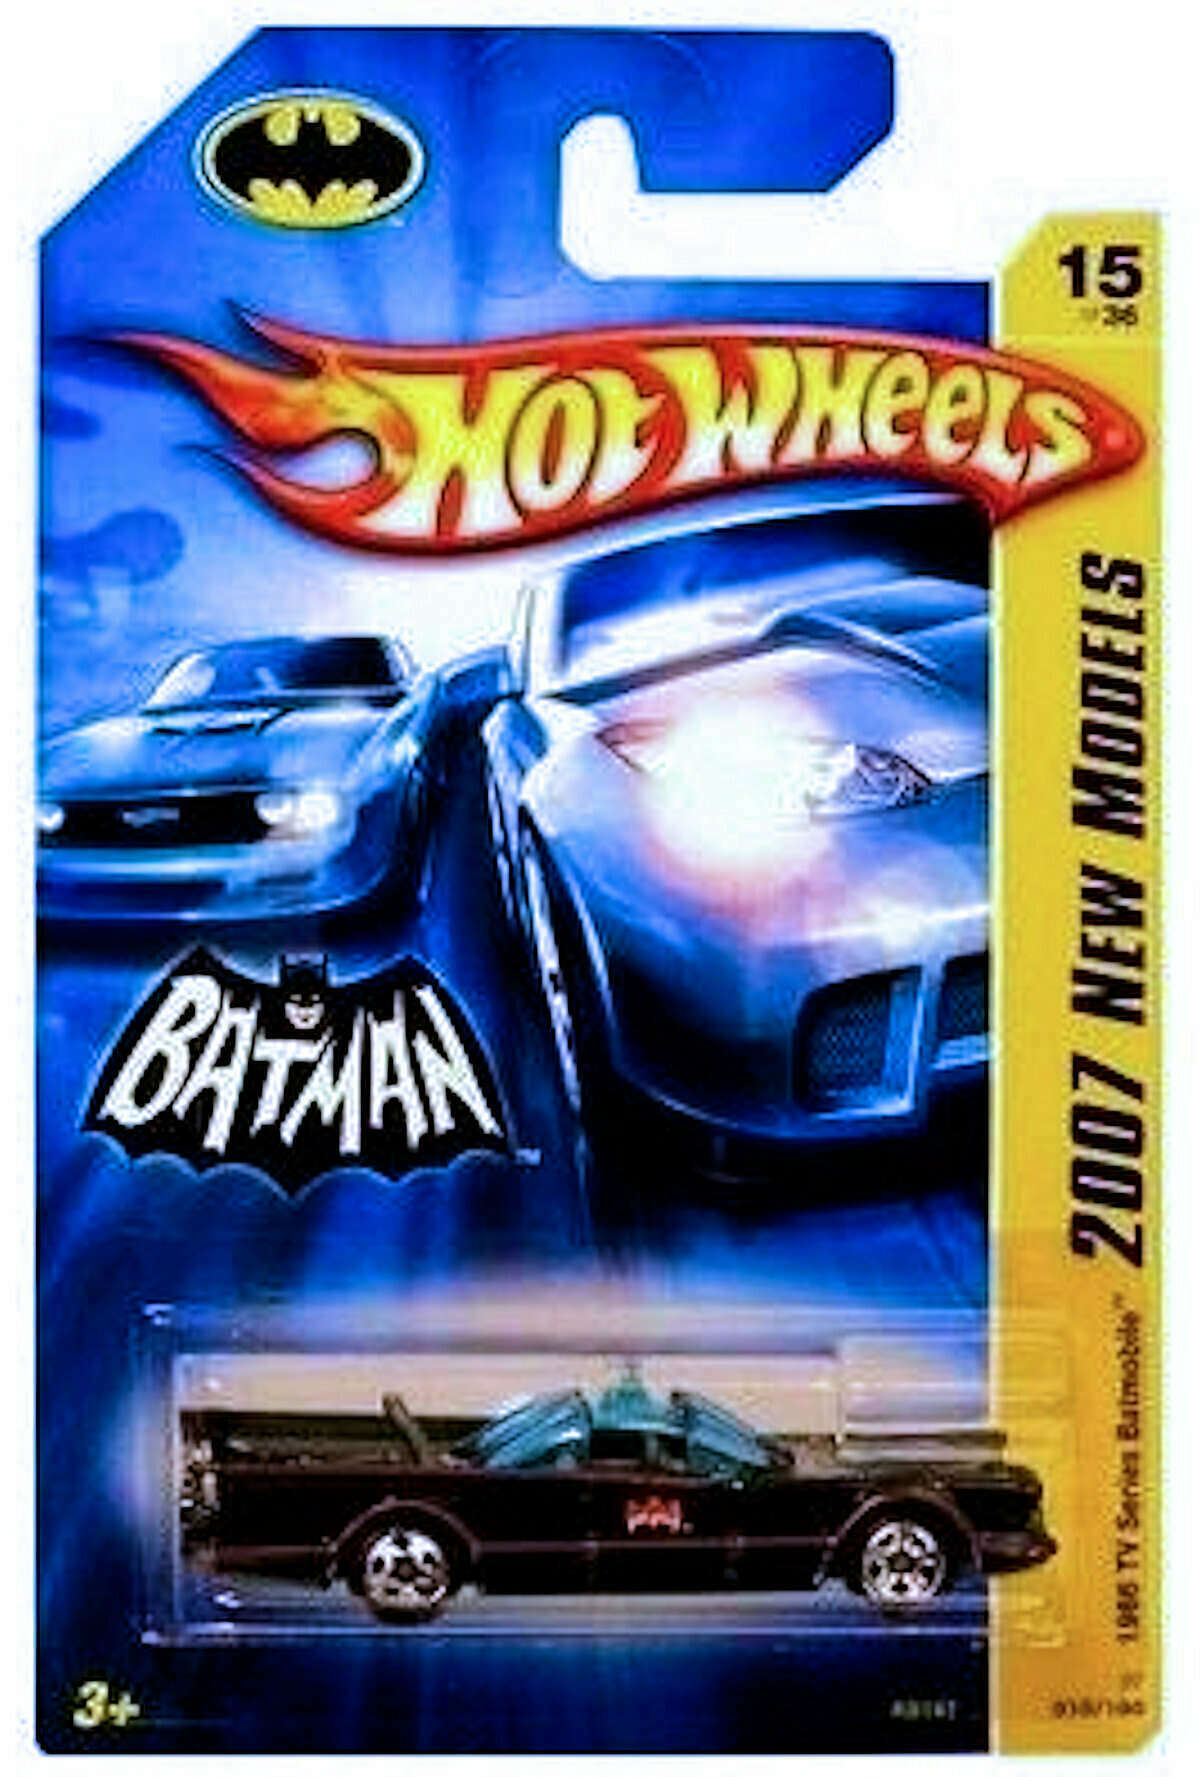 Hot Wheels 2007 - Collector # 015/180 - New Models 15/36 - 1966 TV Series Batmobile - Textured Grille